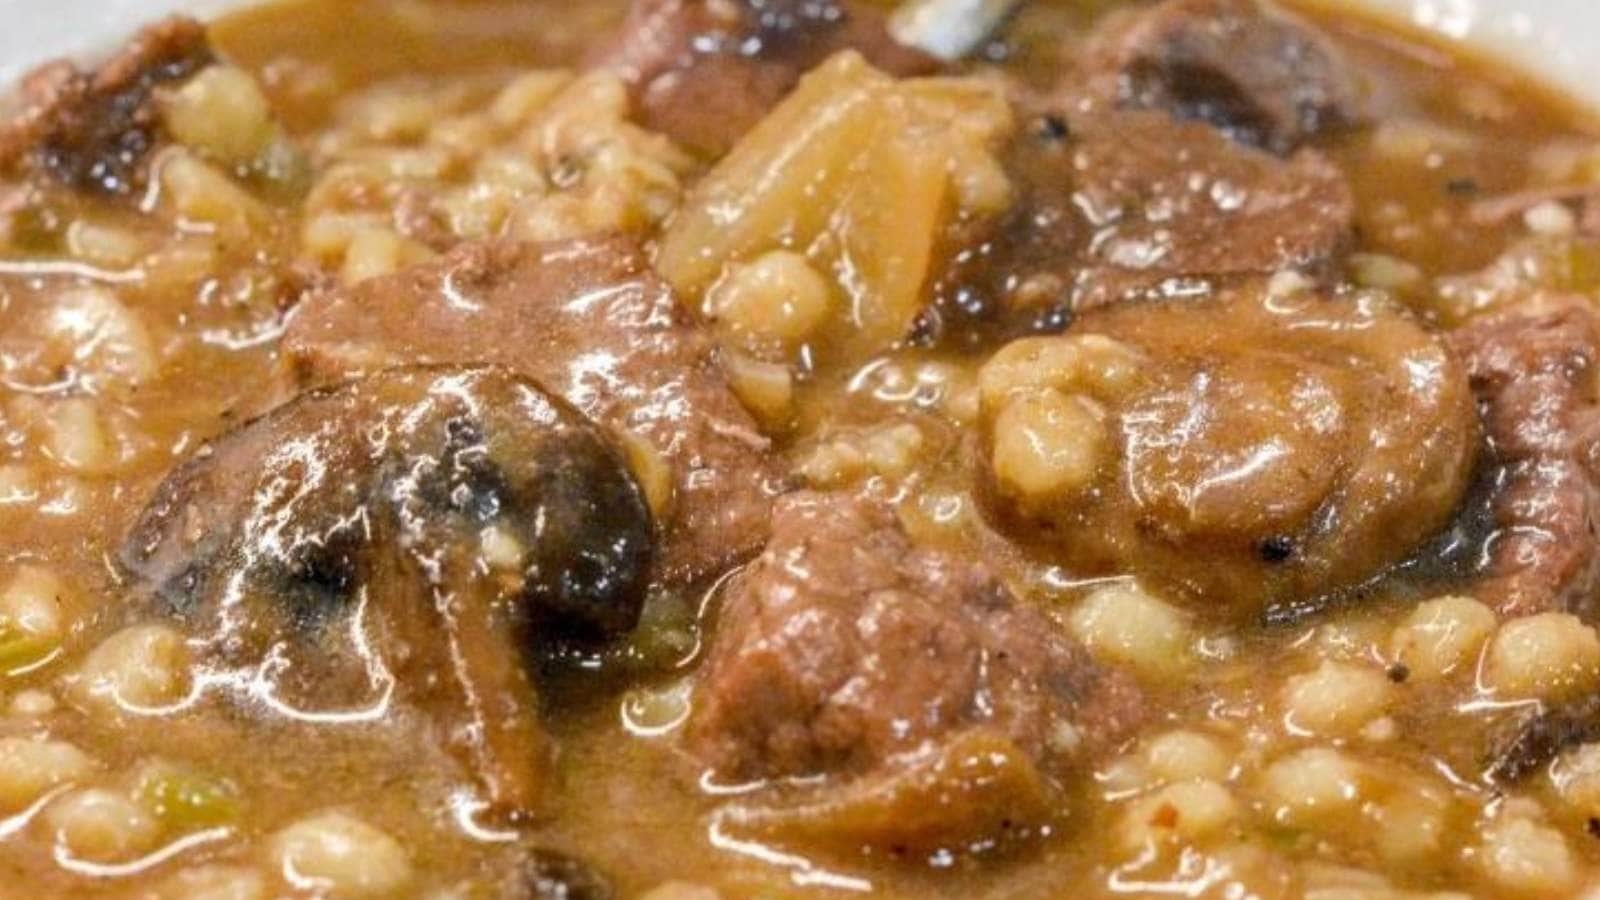 Crock Pot Beef And Barley Soup With Mushrooms recipe by Beyer Eats Drinks.
